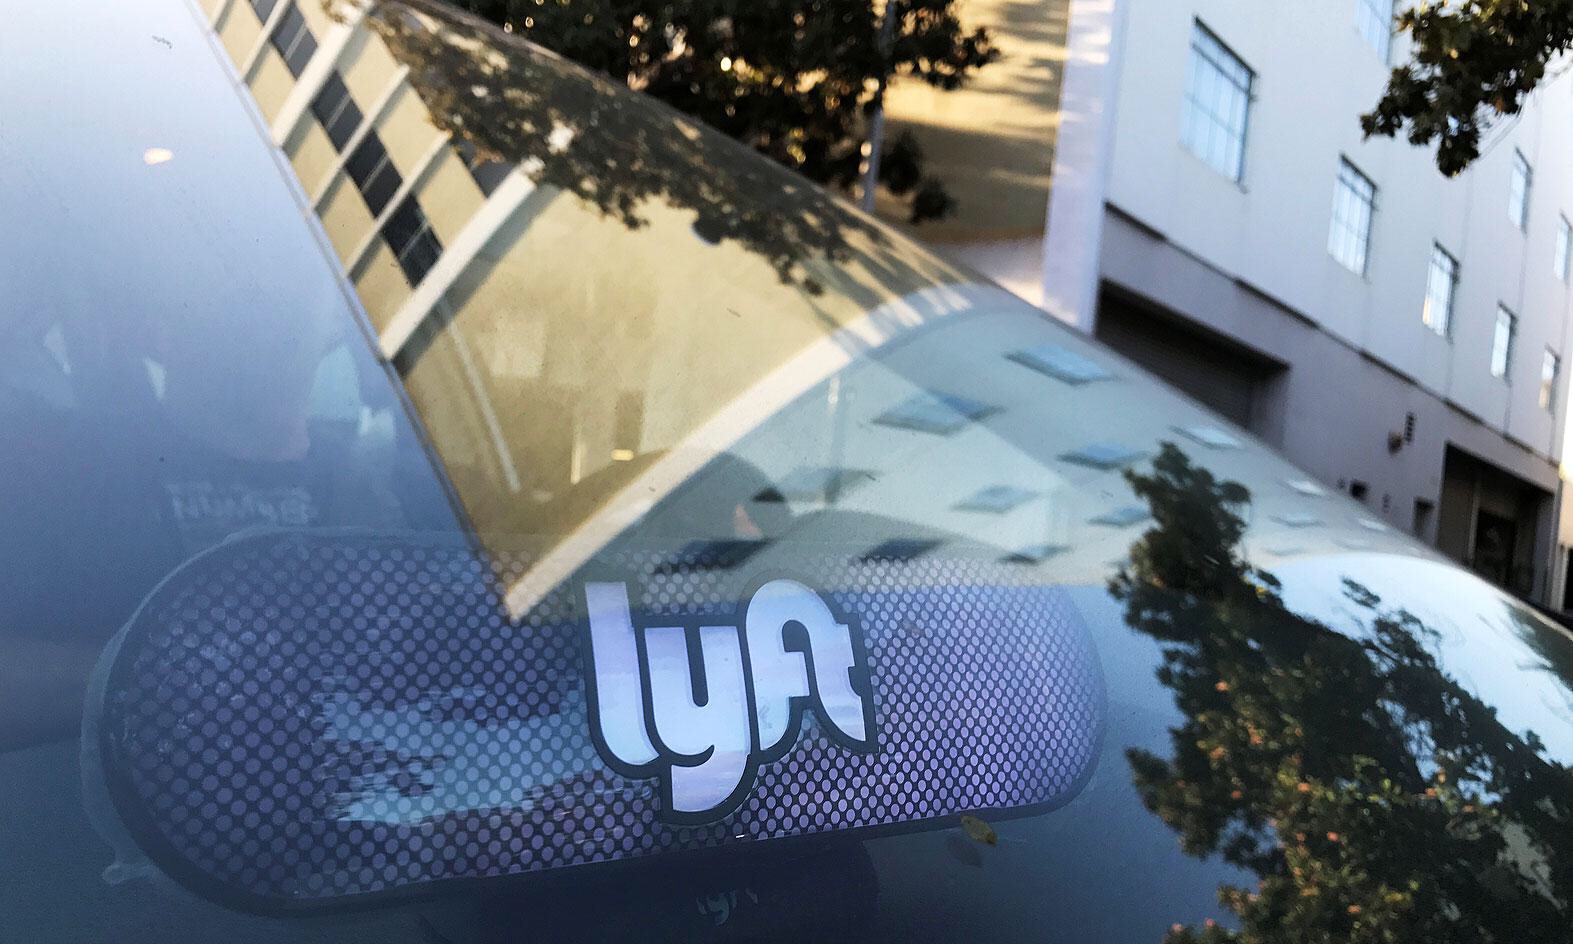 Lyft is teaming up with Magna to build self-driving car systems